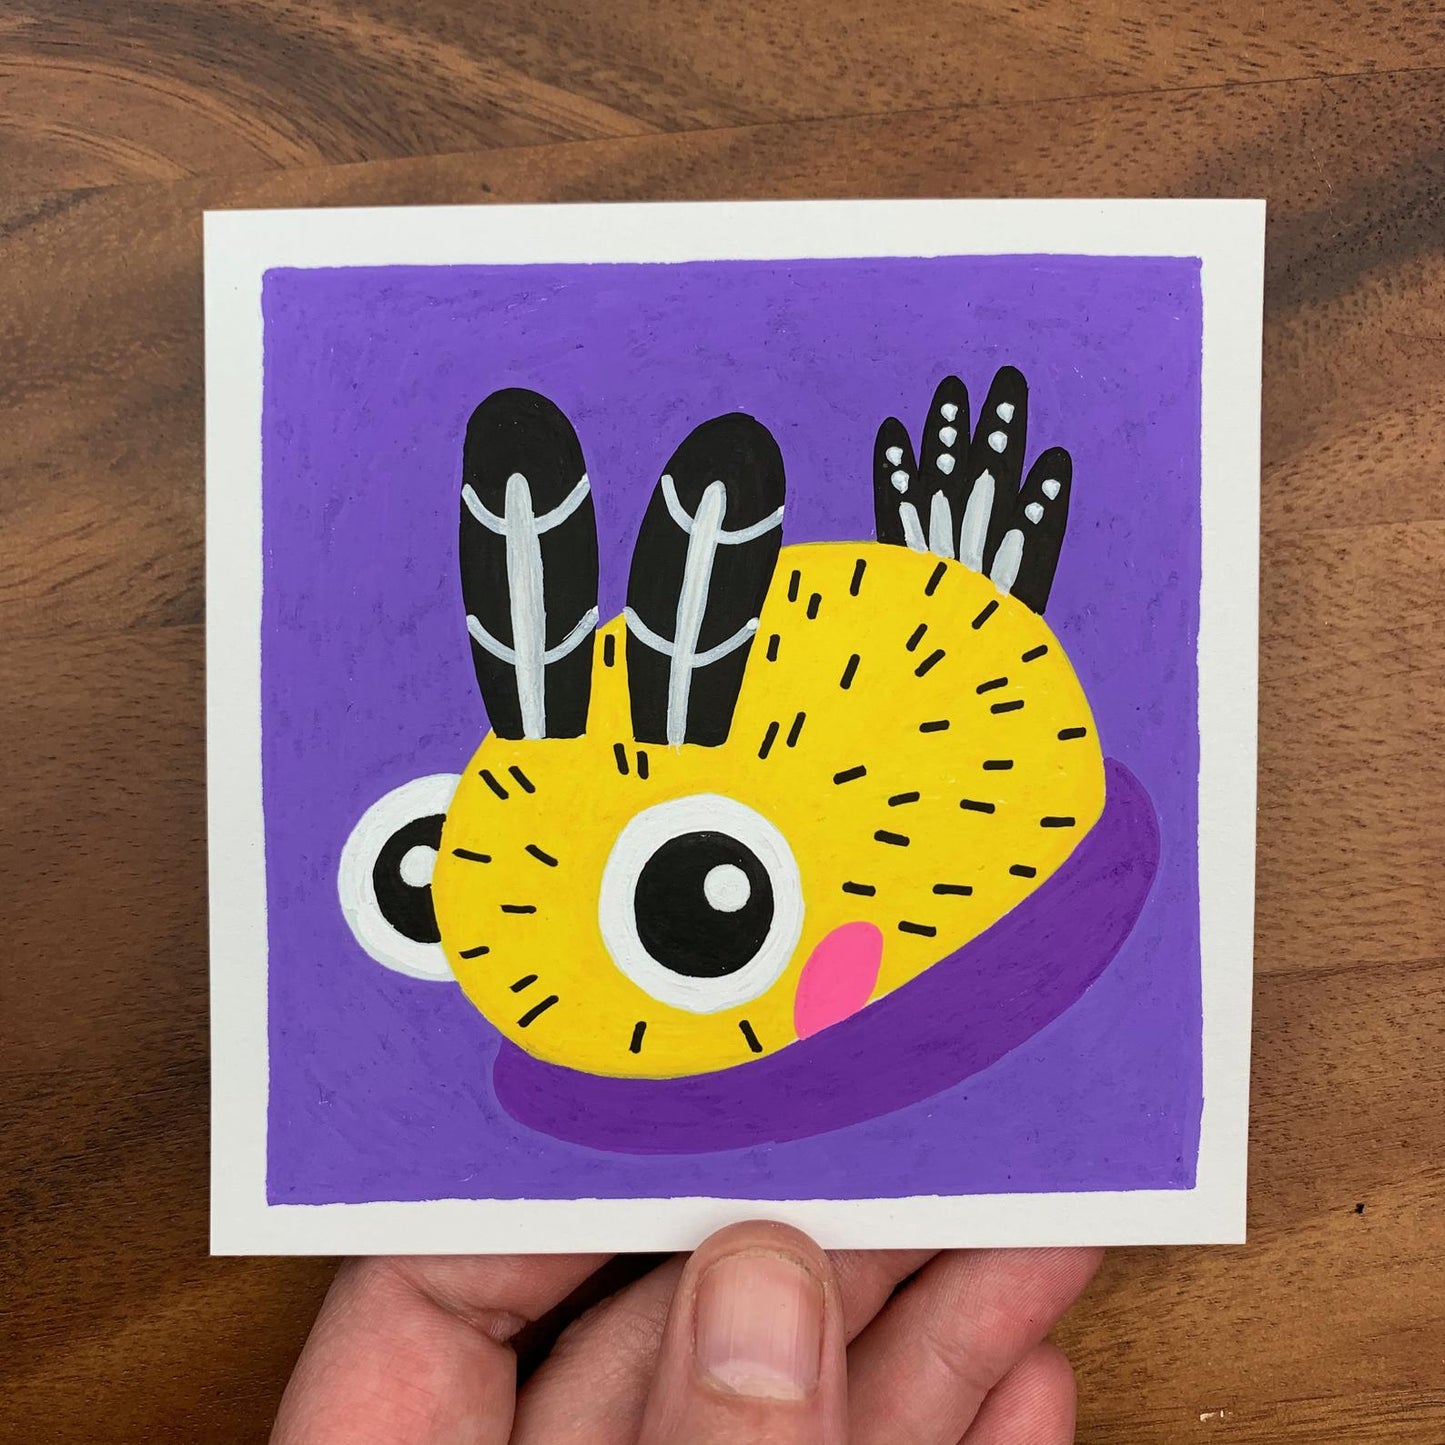 Original artwork of a cute little yellow and black polka dotted sea bunny, or Jorunna Parva. Materials used: Uni-Posca paint markers.